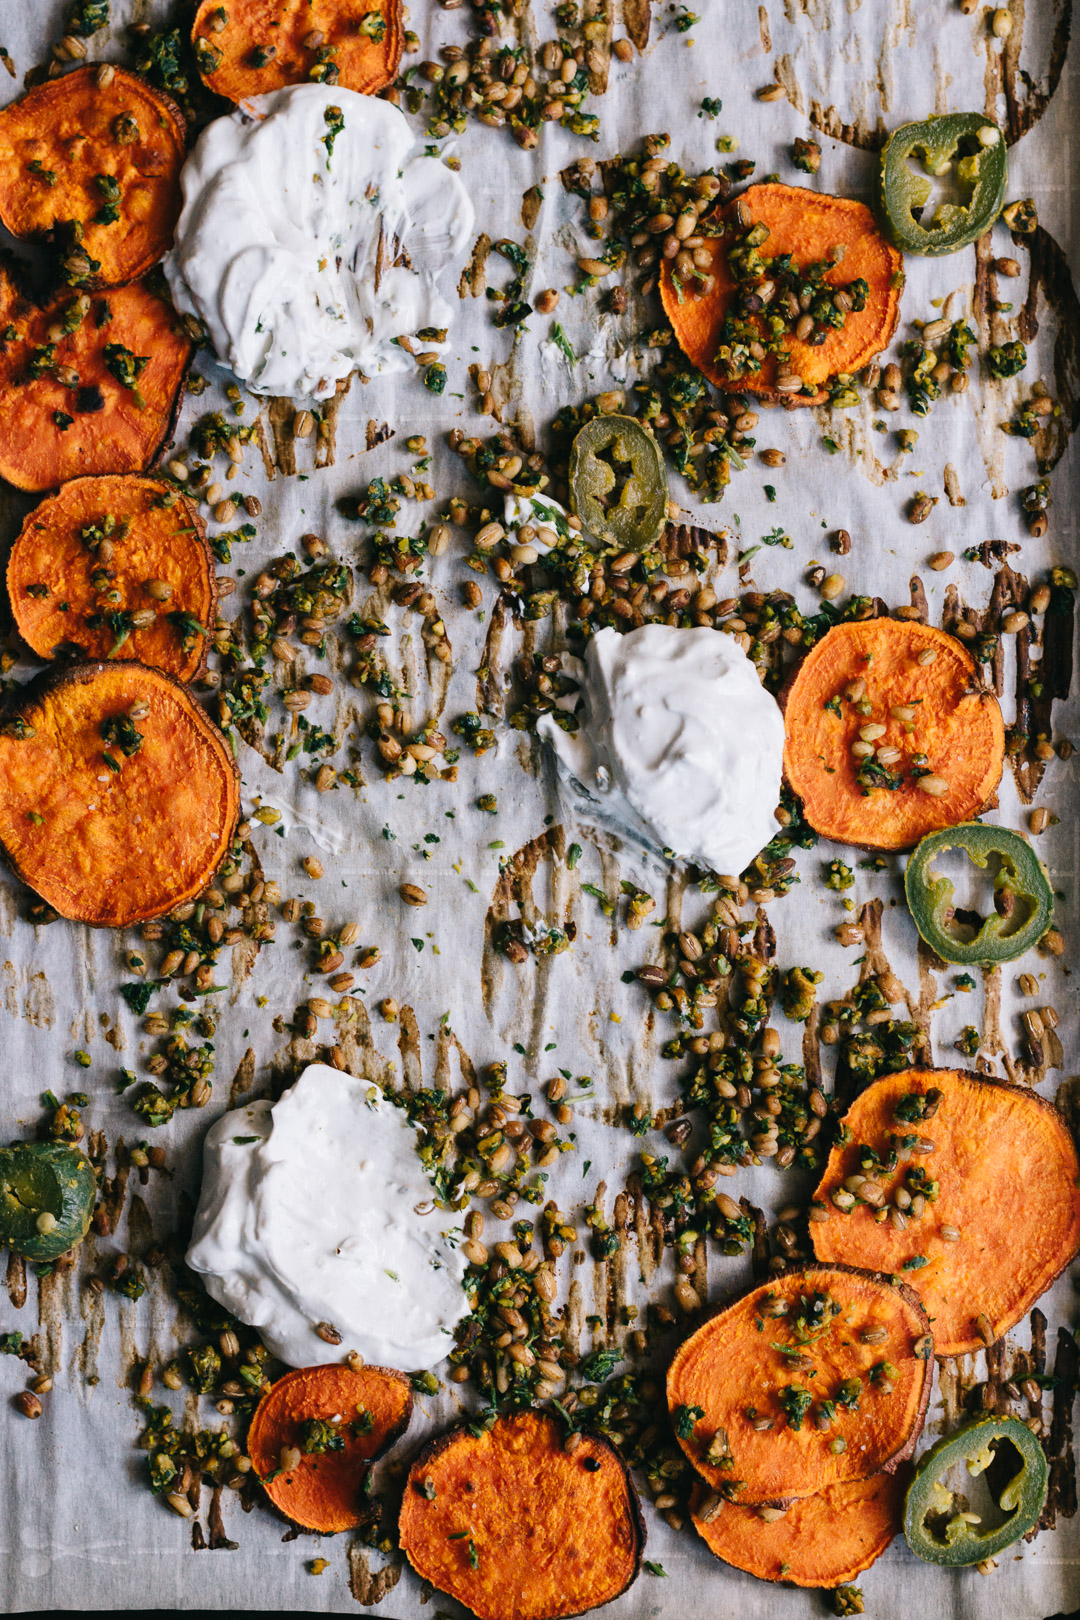 Overhead shot of parchment covered baking sheet that's been used as a serving platter people have eaten off of. There are a few sweet potato crisps leftover, gremolata and barley scattered everywhere, and dollops of dip that have been used.